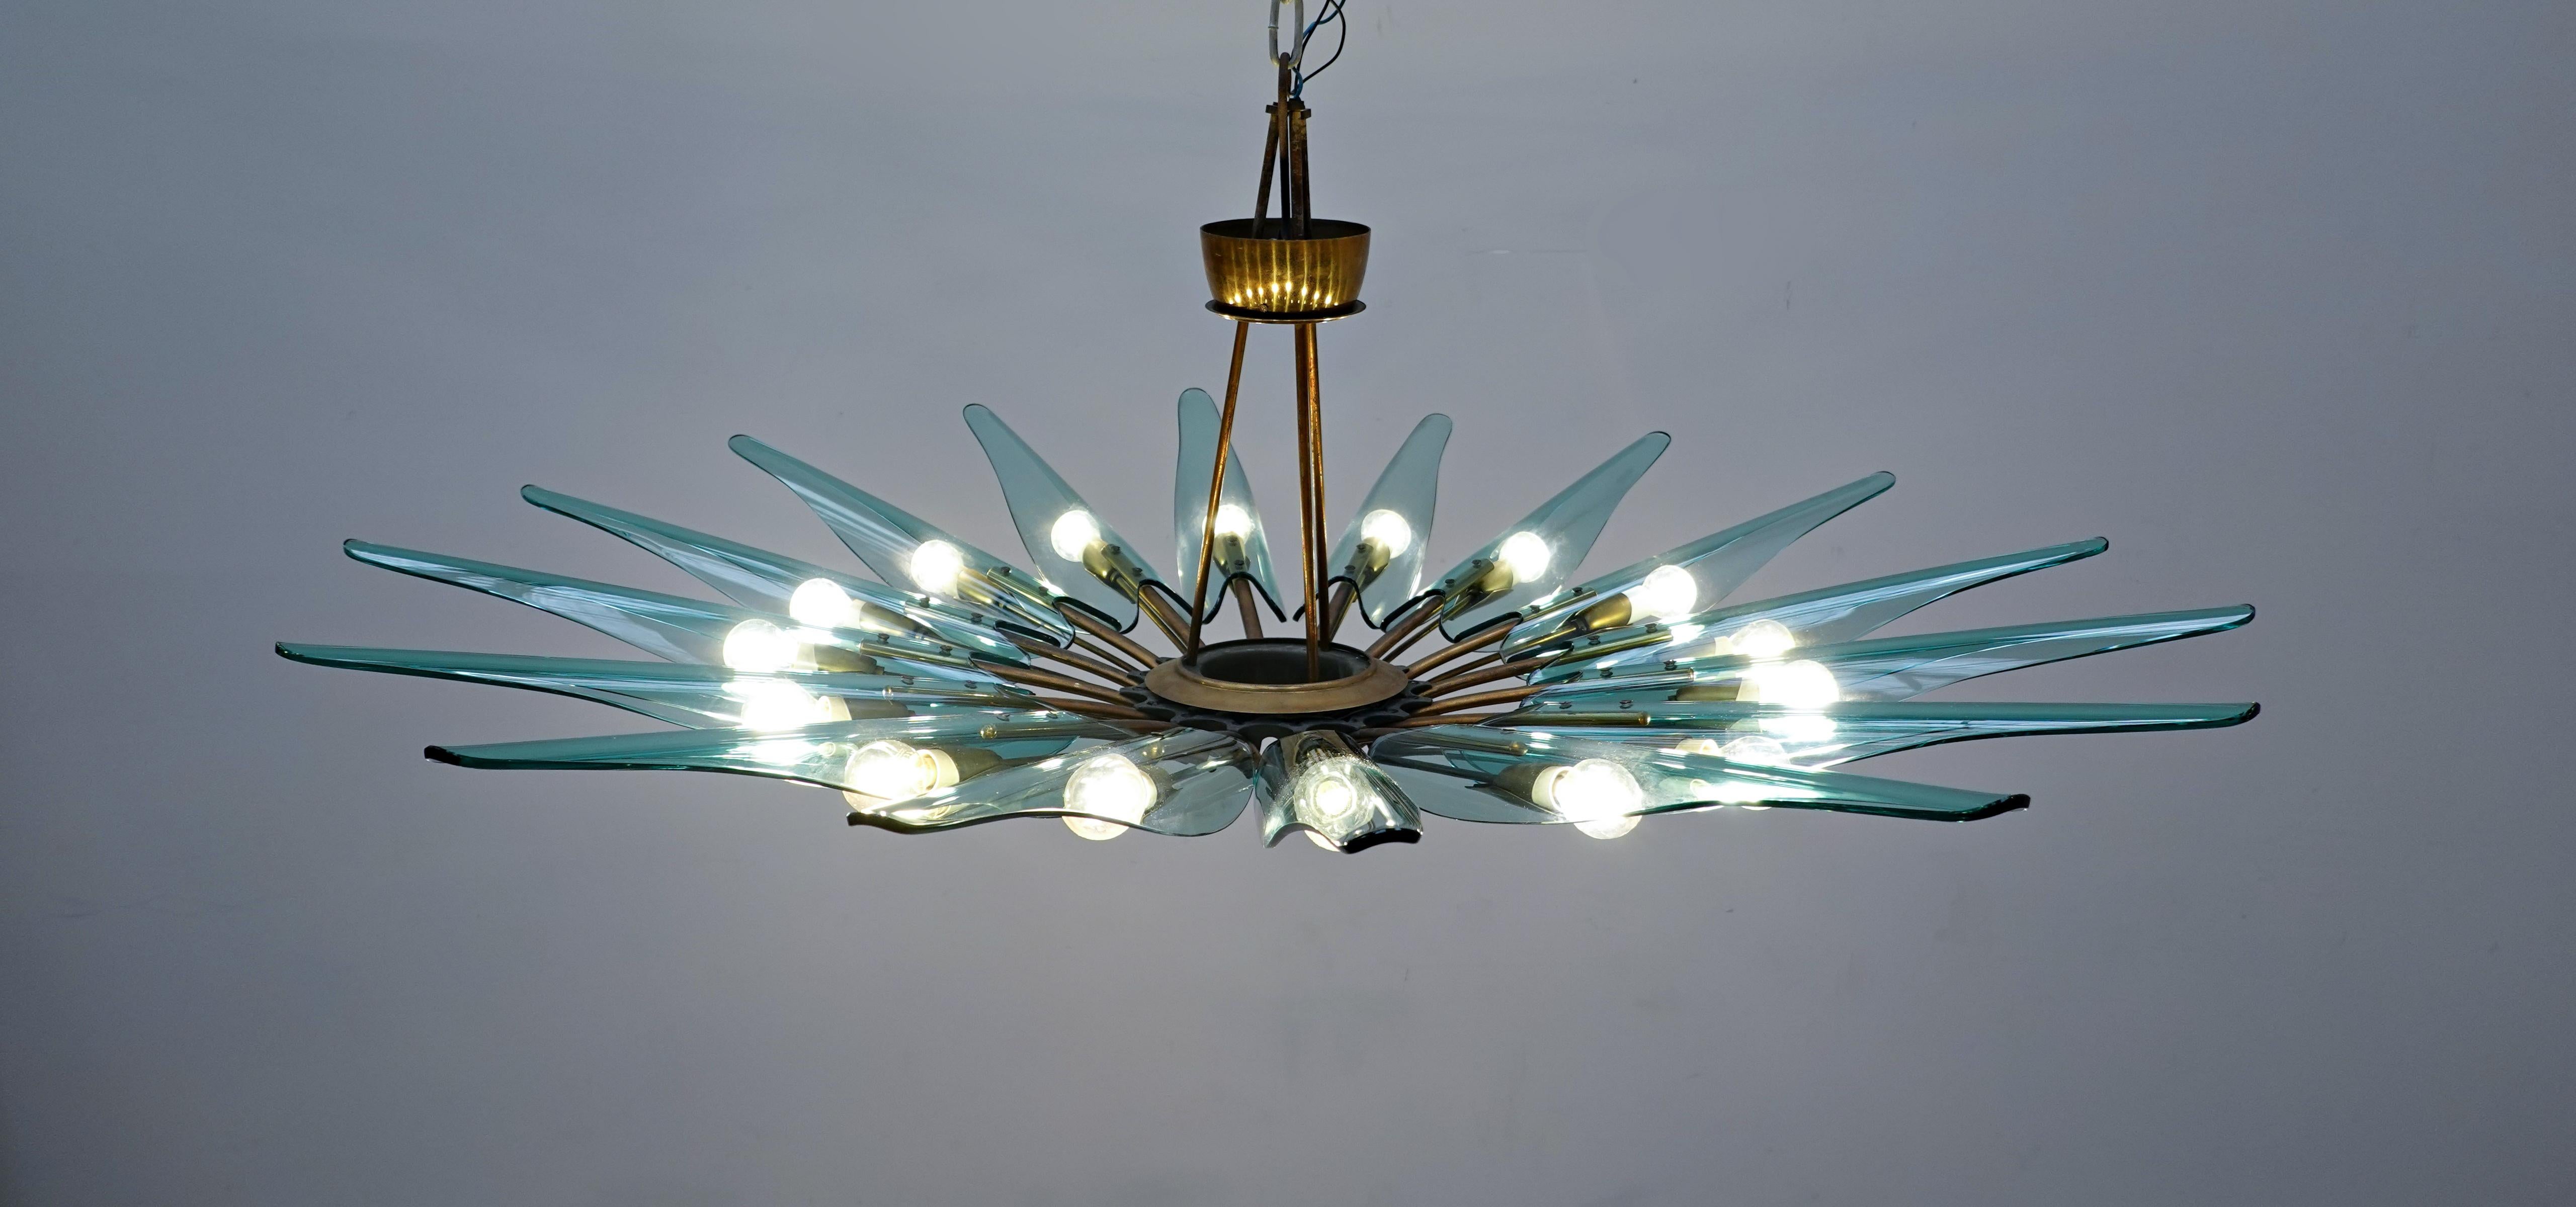 Dahlia chandelier mod. 1563A by Max Ingrand for Fontana Arte, Italy, 1950.

The Dahlia Chandelier is one of the most iconic pieces from the Fontana Arte archive. Designed in the mid 1950s,  it continues to impress some 70 years later. 


Maker